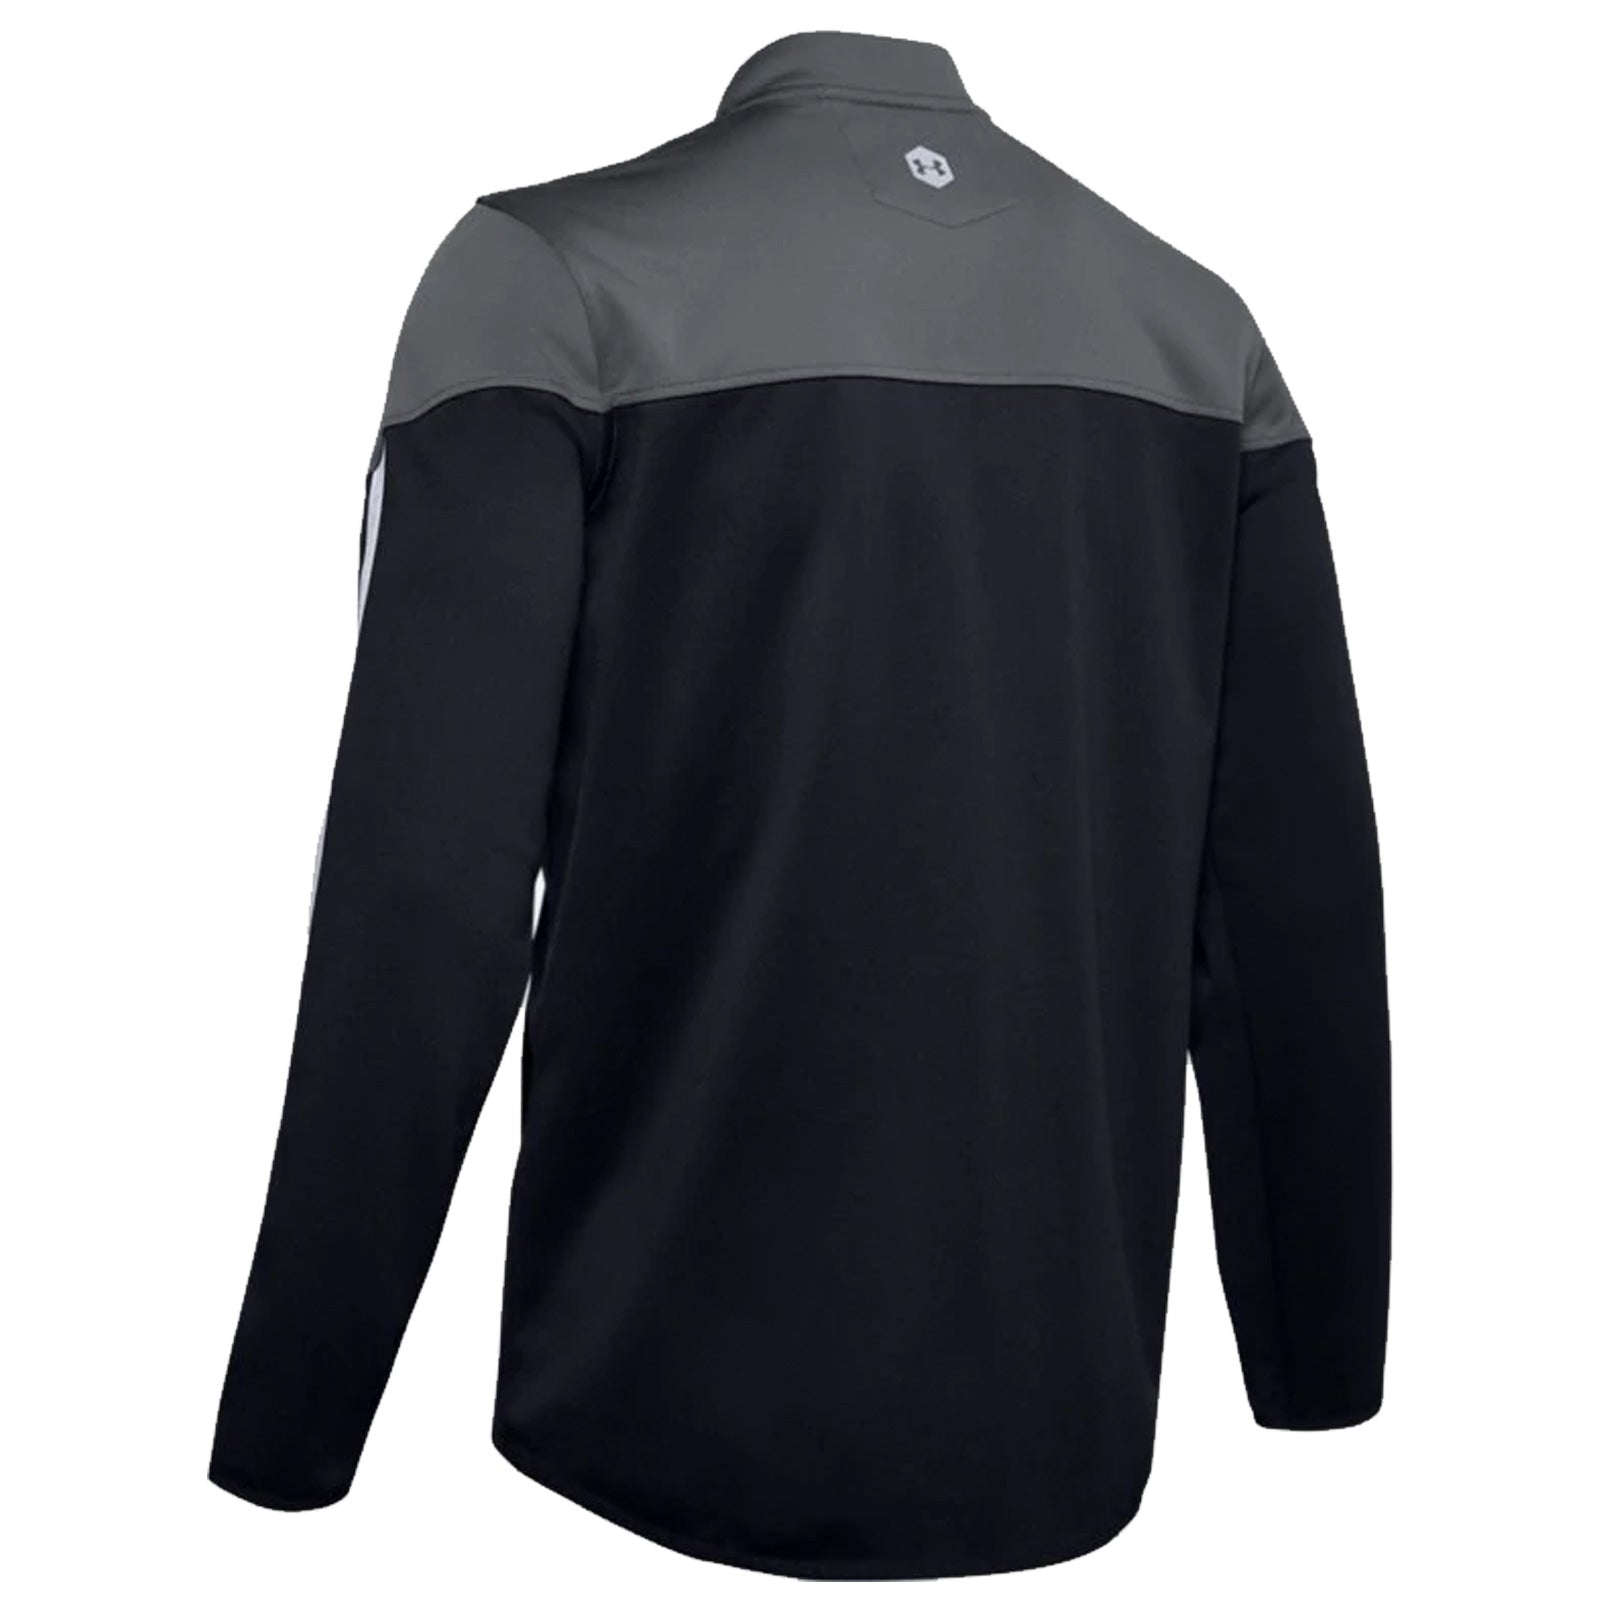 Under Armour Mens Recovery Knit Warm Up Jacket